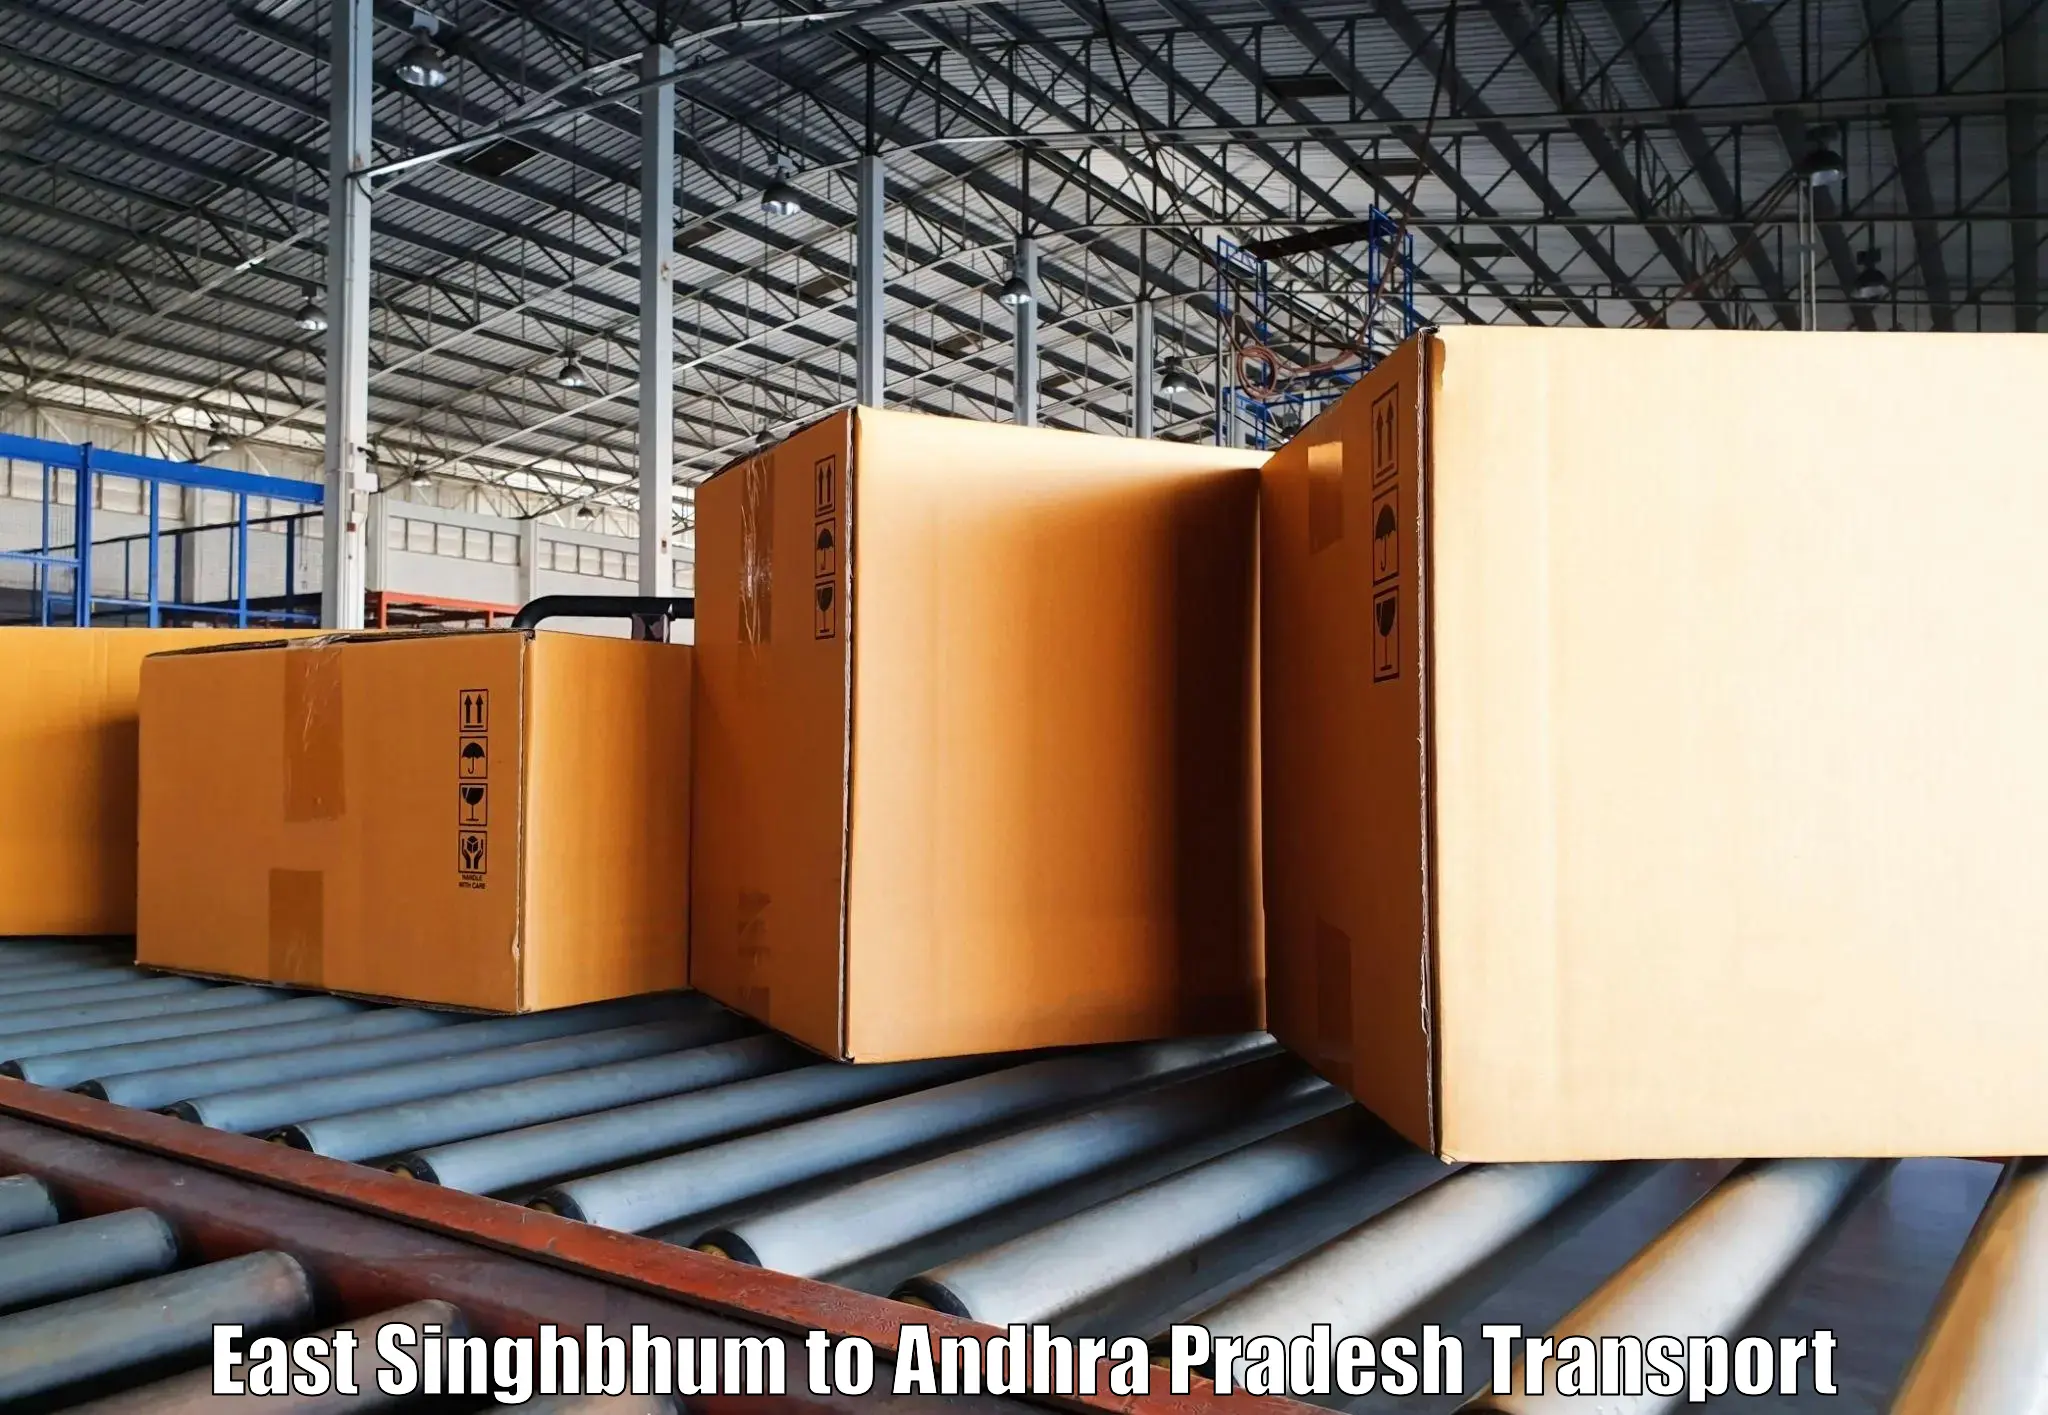 Best transport services in India in East Singhbhum to Cuddapah